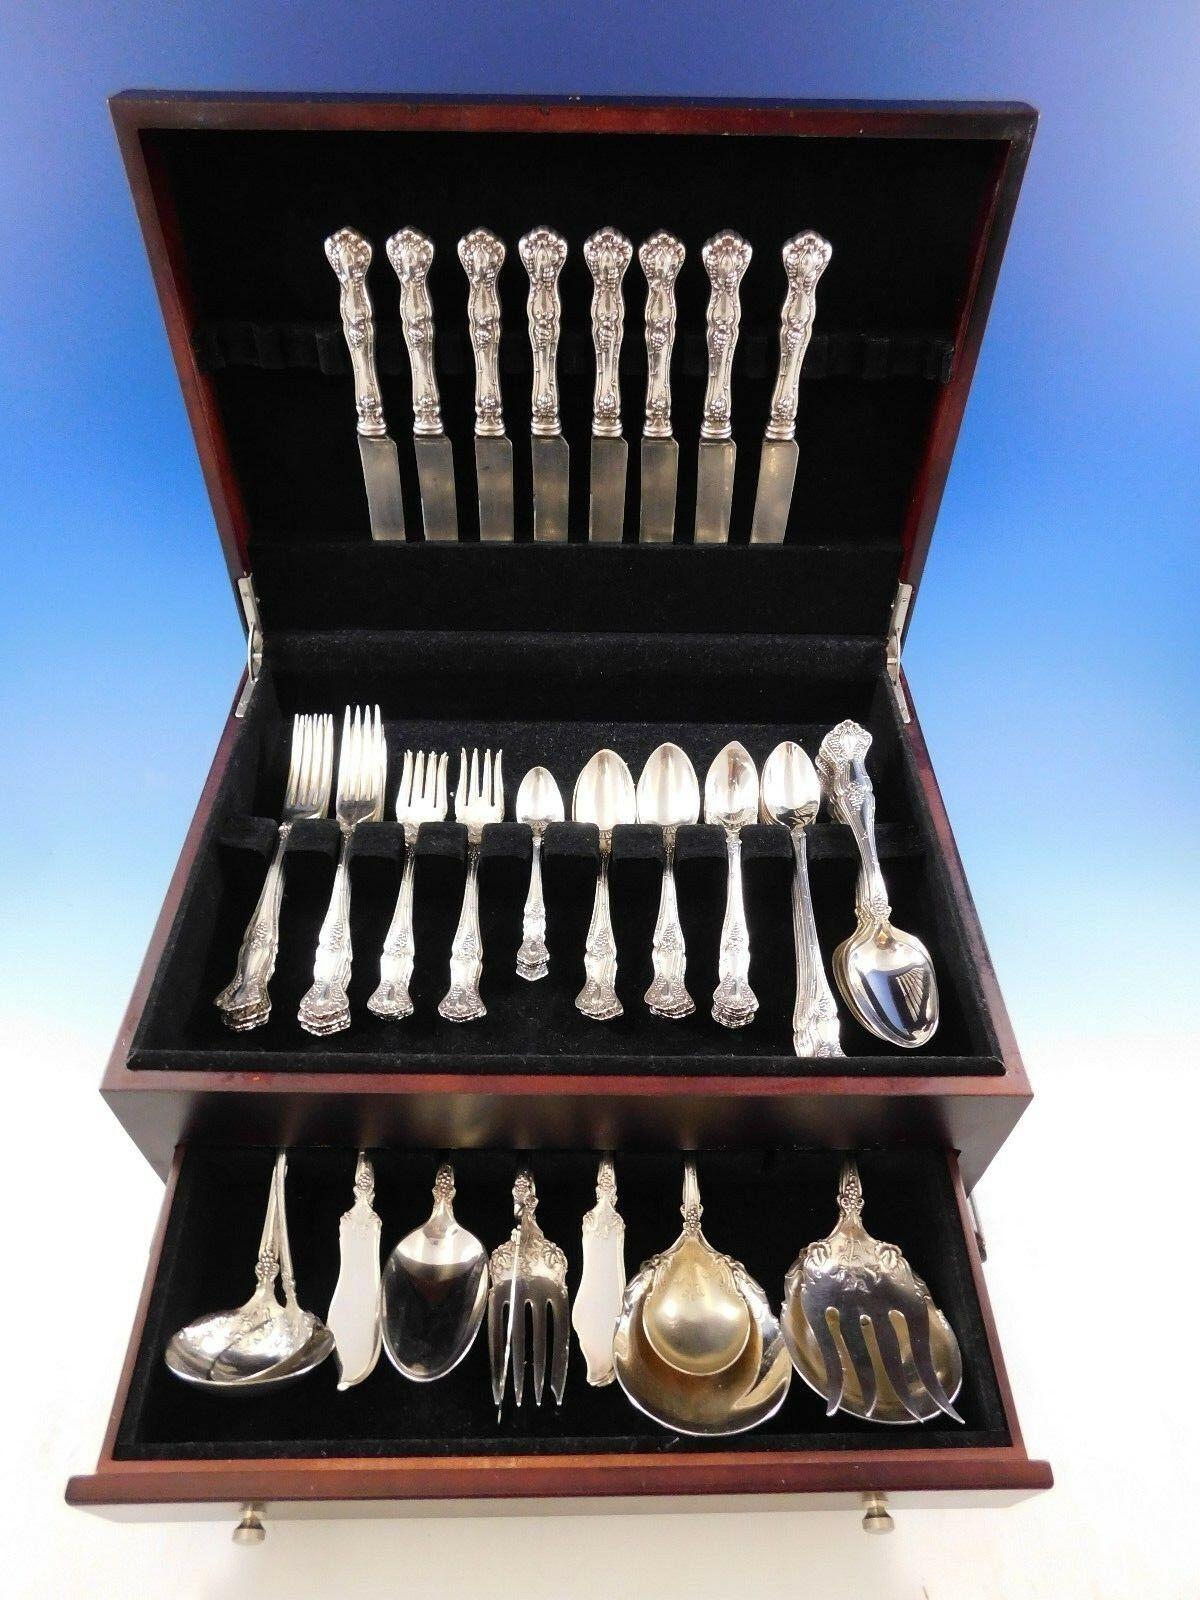 Vintage by 1847 Rogers silver plate flatware set, 81 pieces. This highly collectable pattern features a grape motif. This set includes:

8 knives, 8 3/4